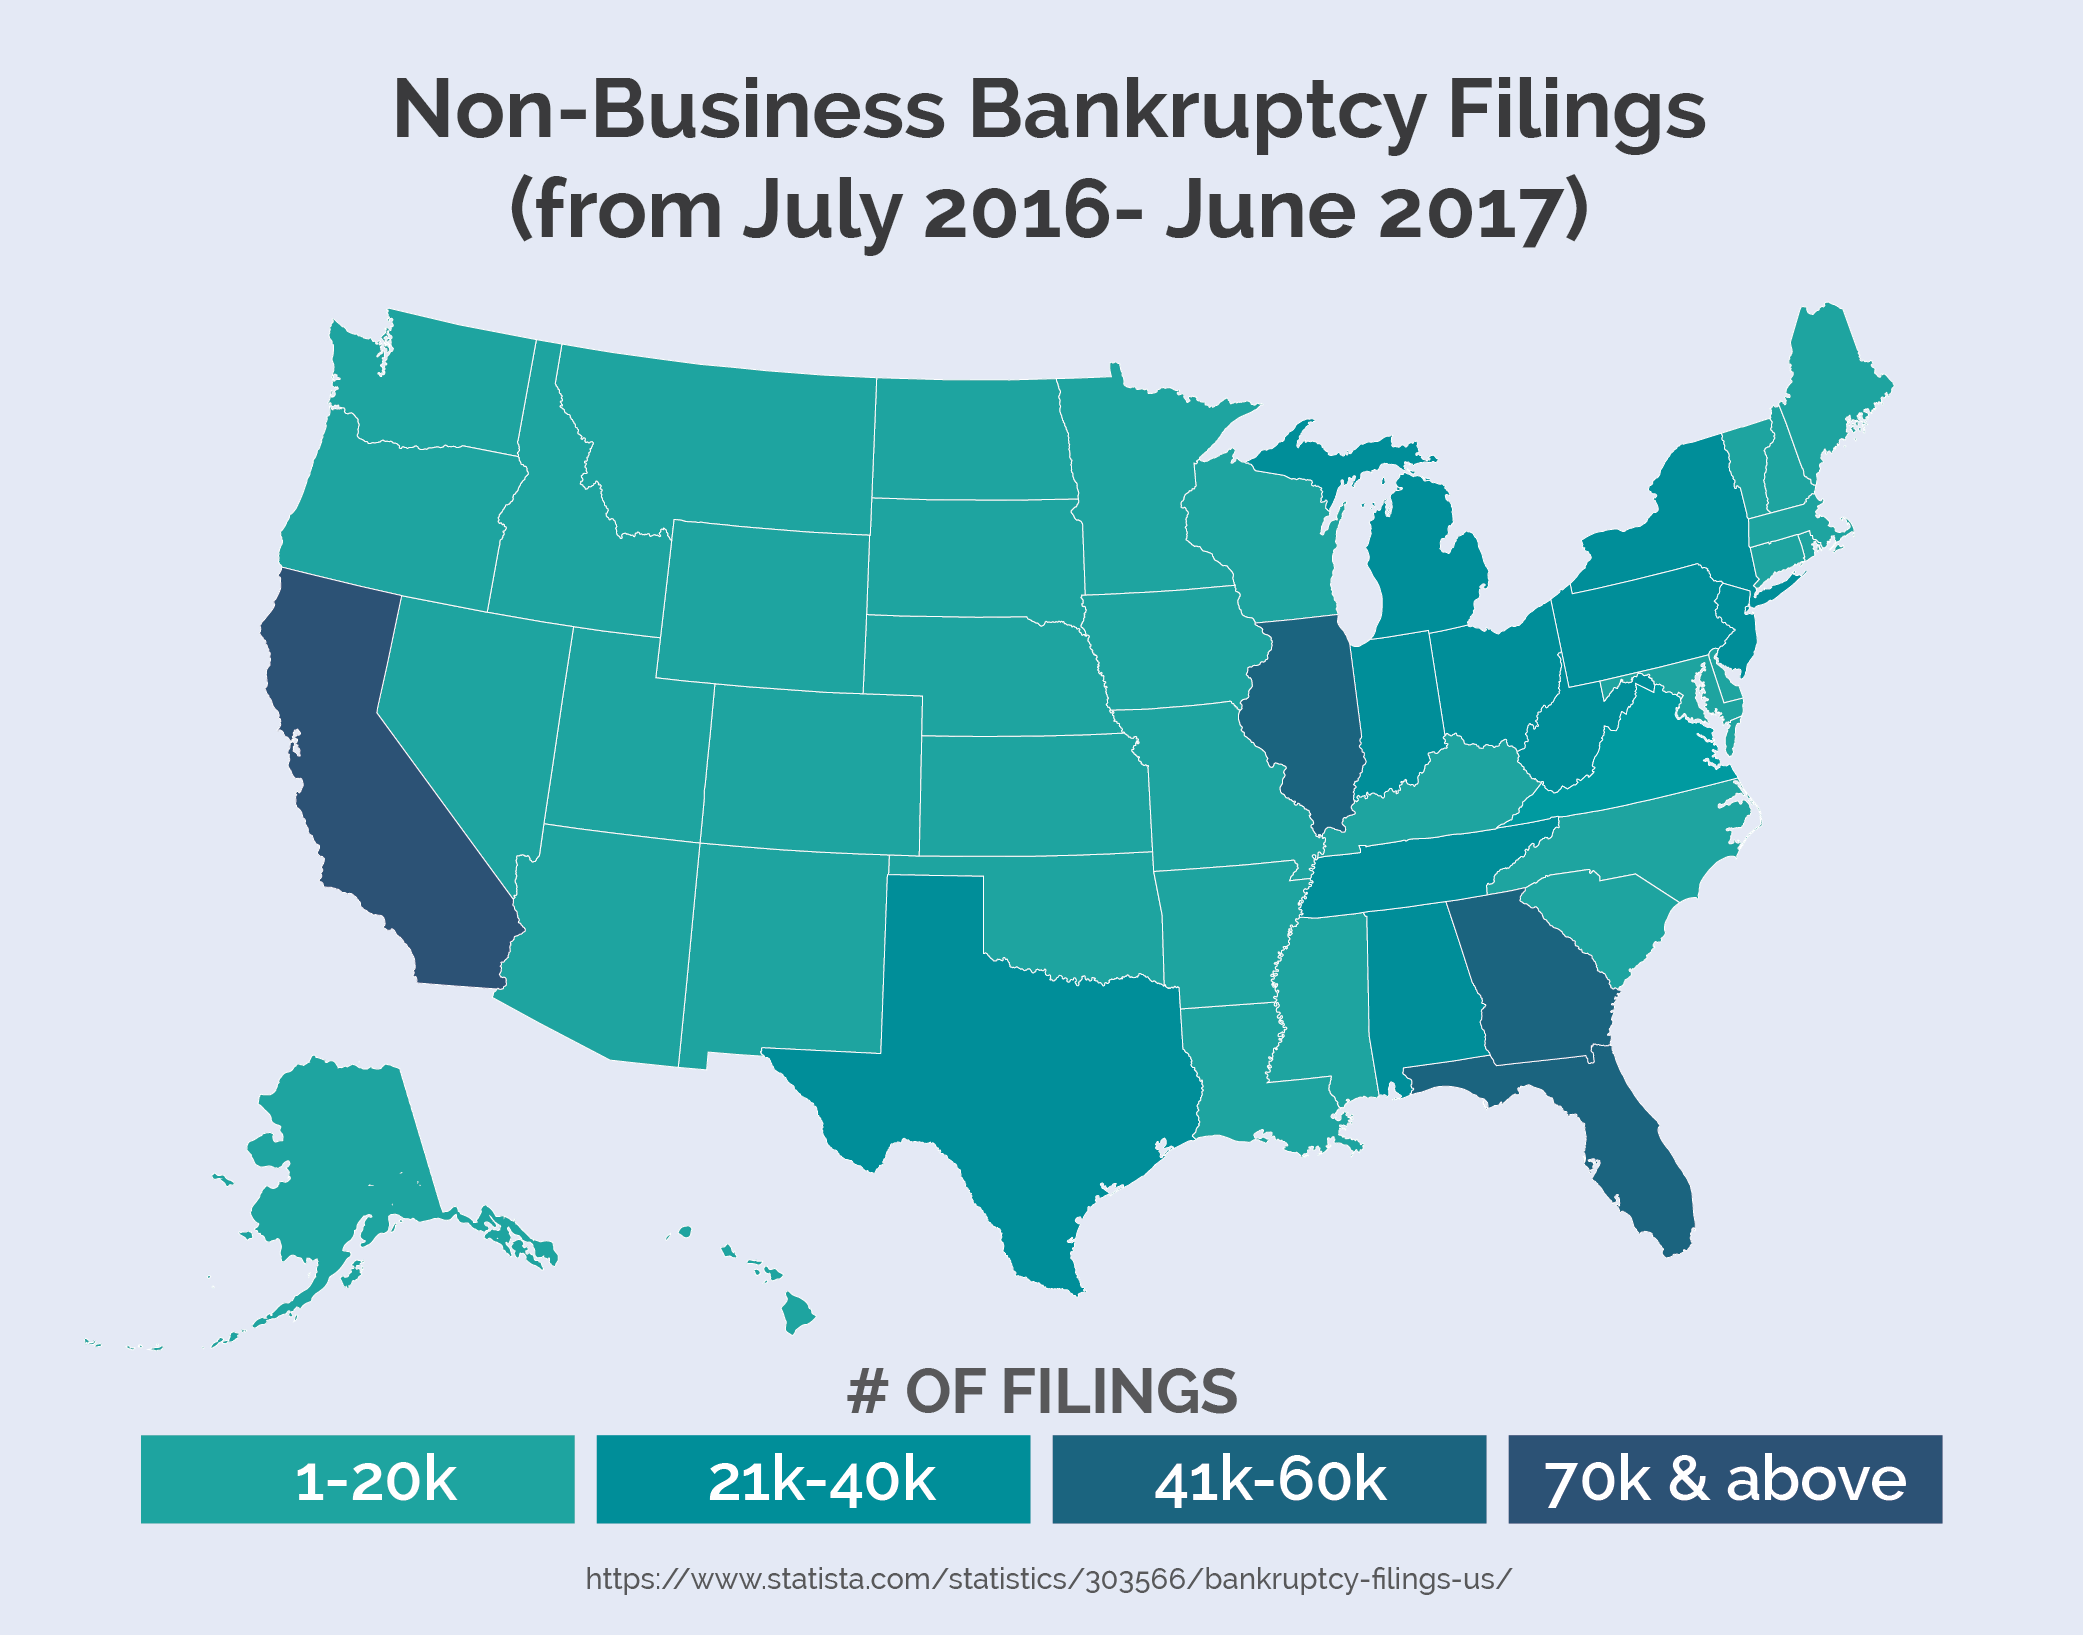 Non-Business Bankruptcy Filings